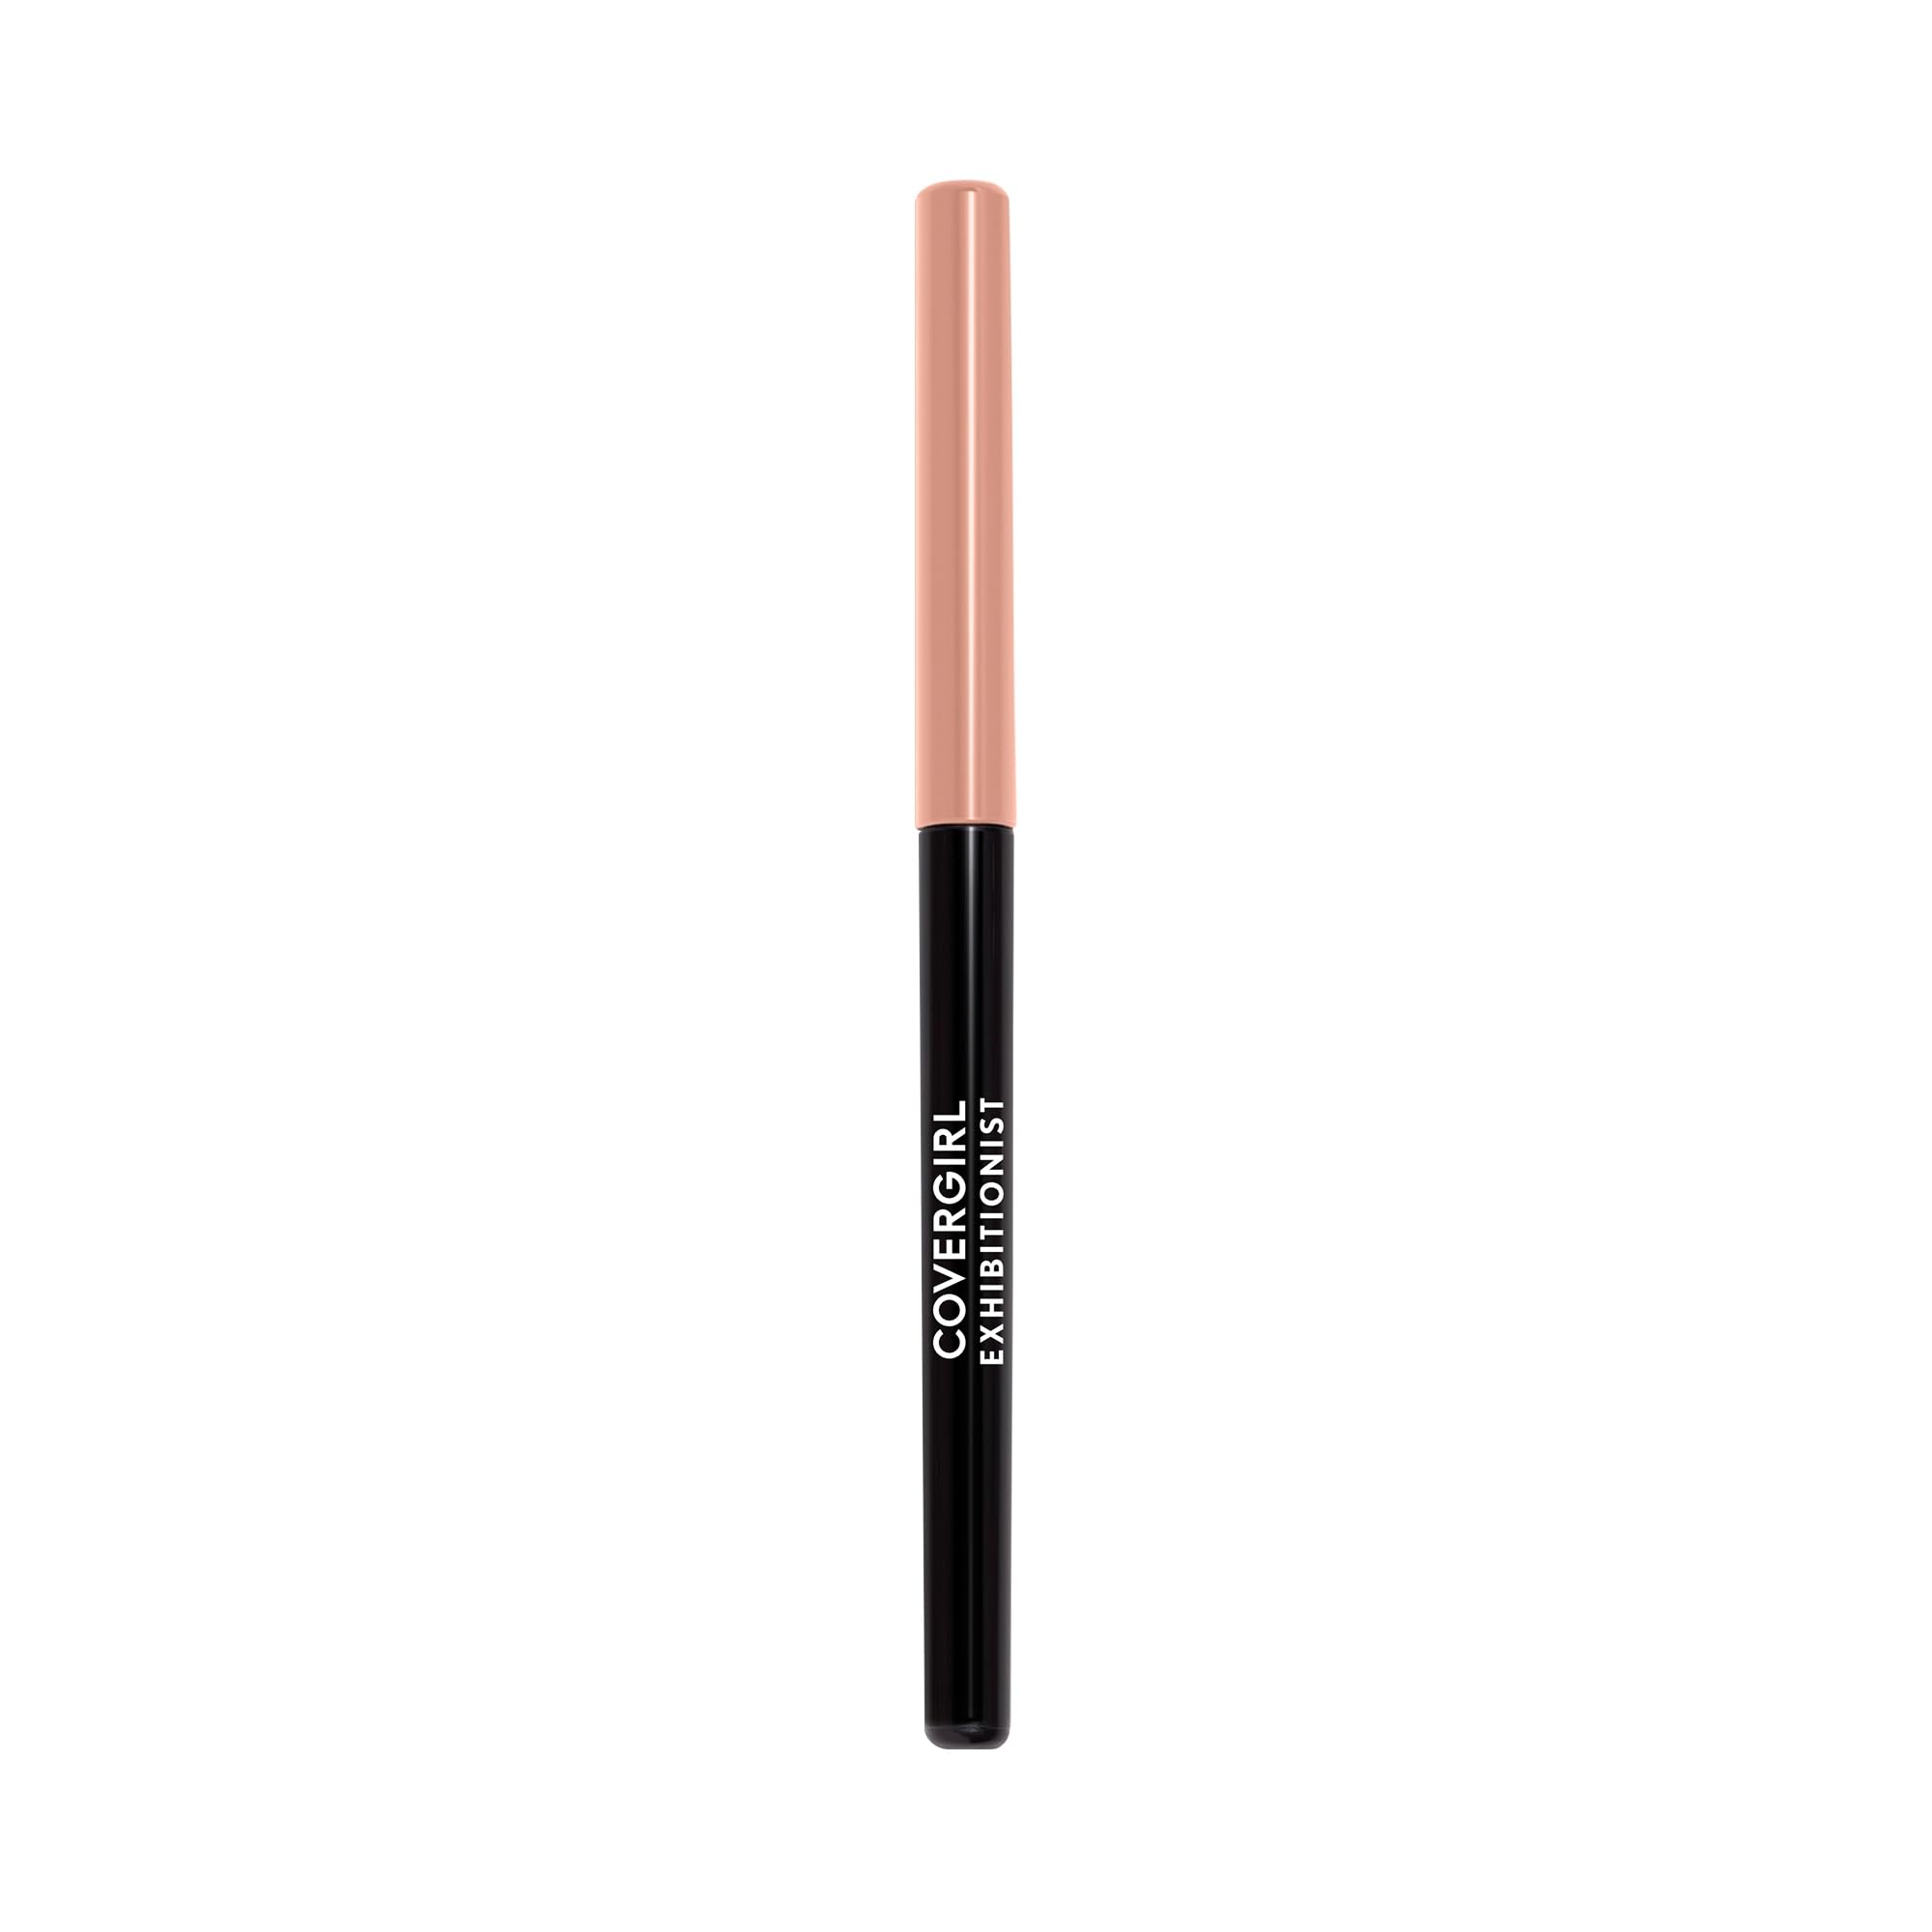 COVERGIRL Exhibitionist Lip Liner, Pencil, Creamy, In the Nude, 0.012 Fl Oz ,Lip Crayon, Makeup, Intense Pigmentation, Self-Sharpening Easy Application, Instant Definition